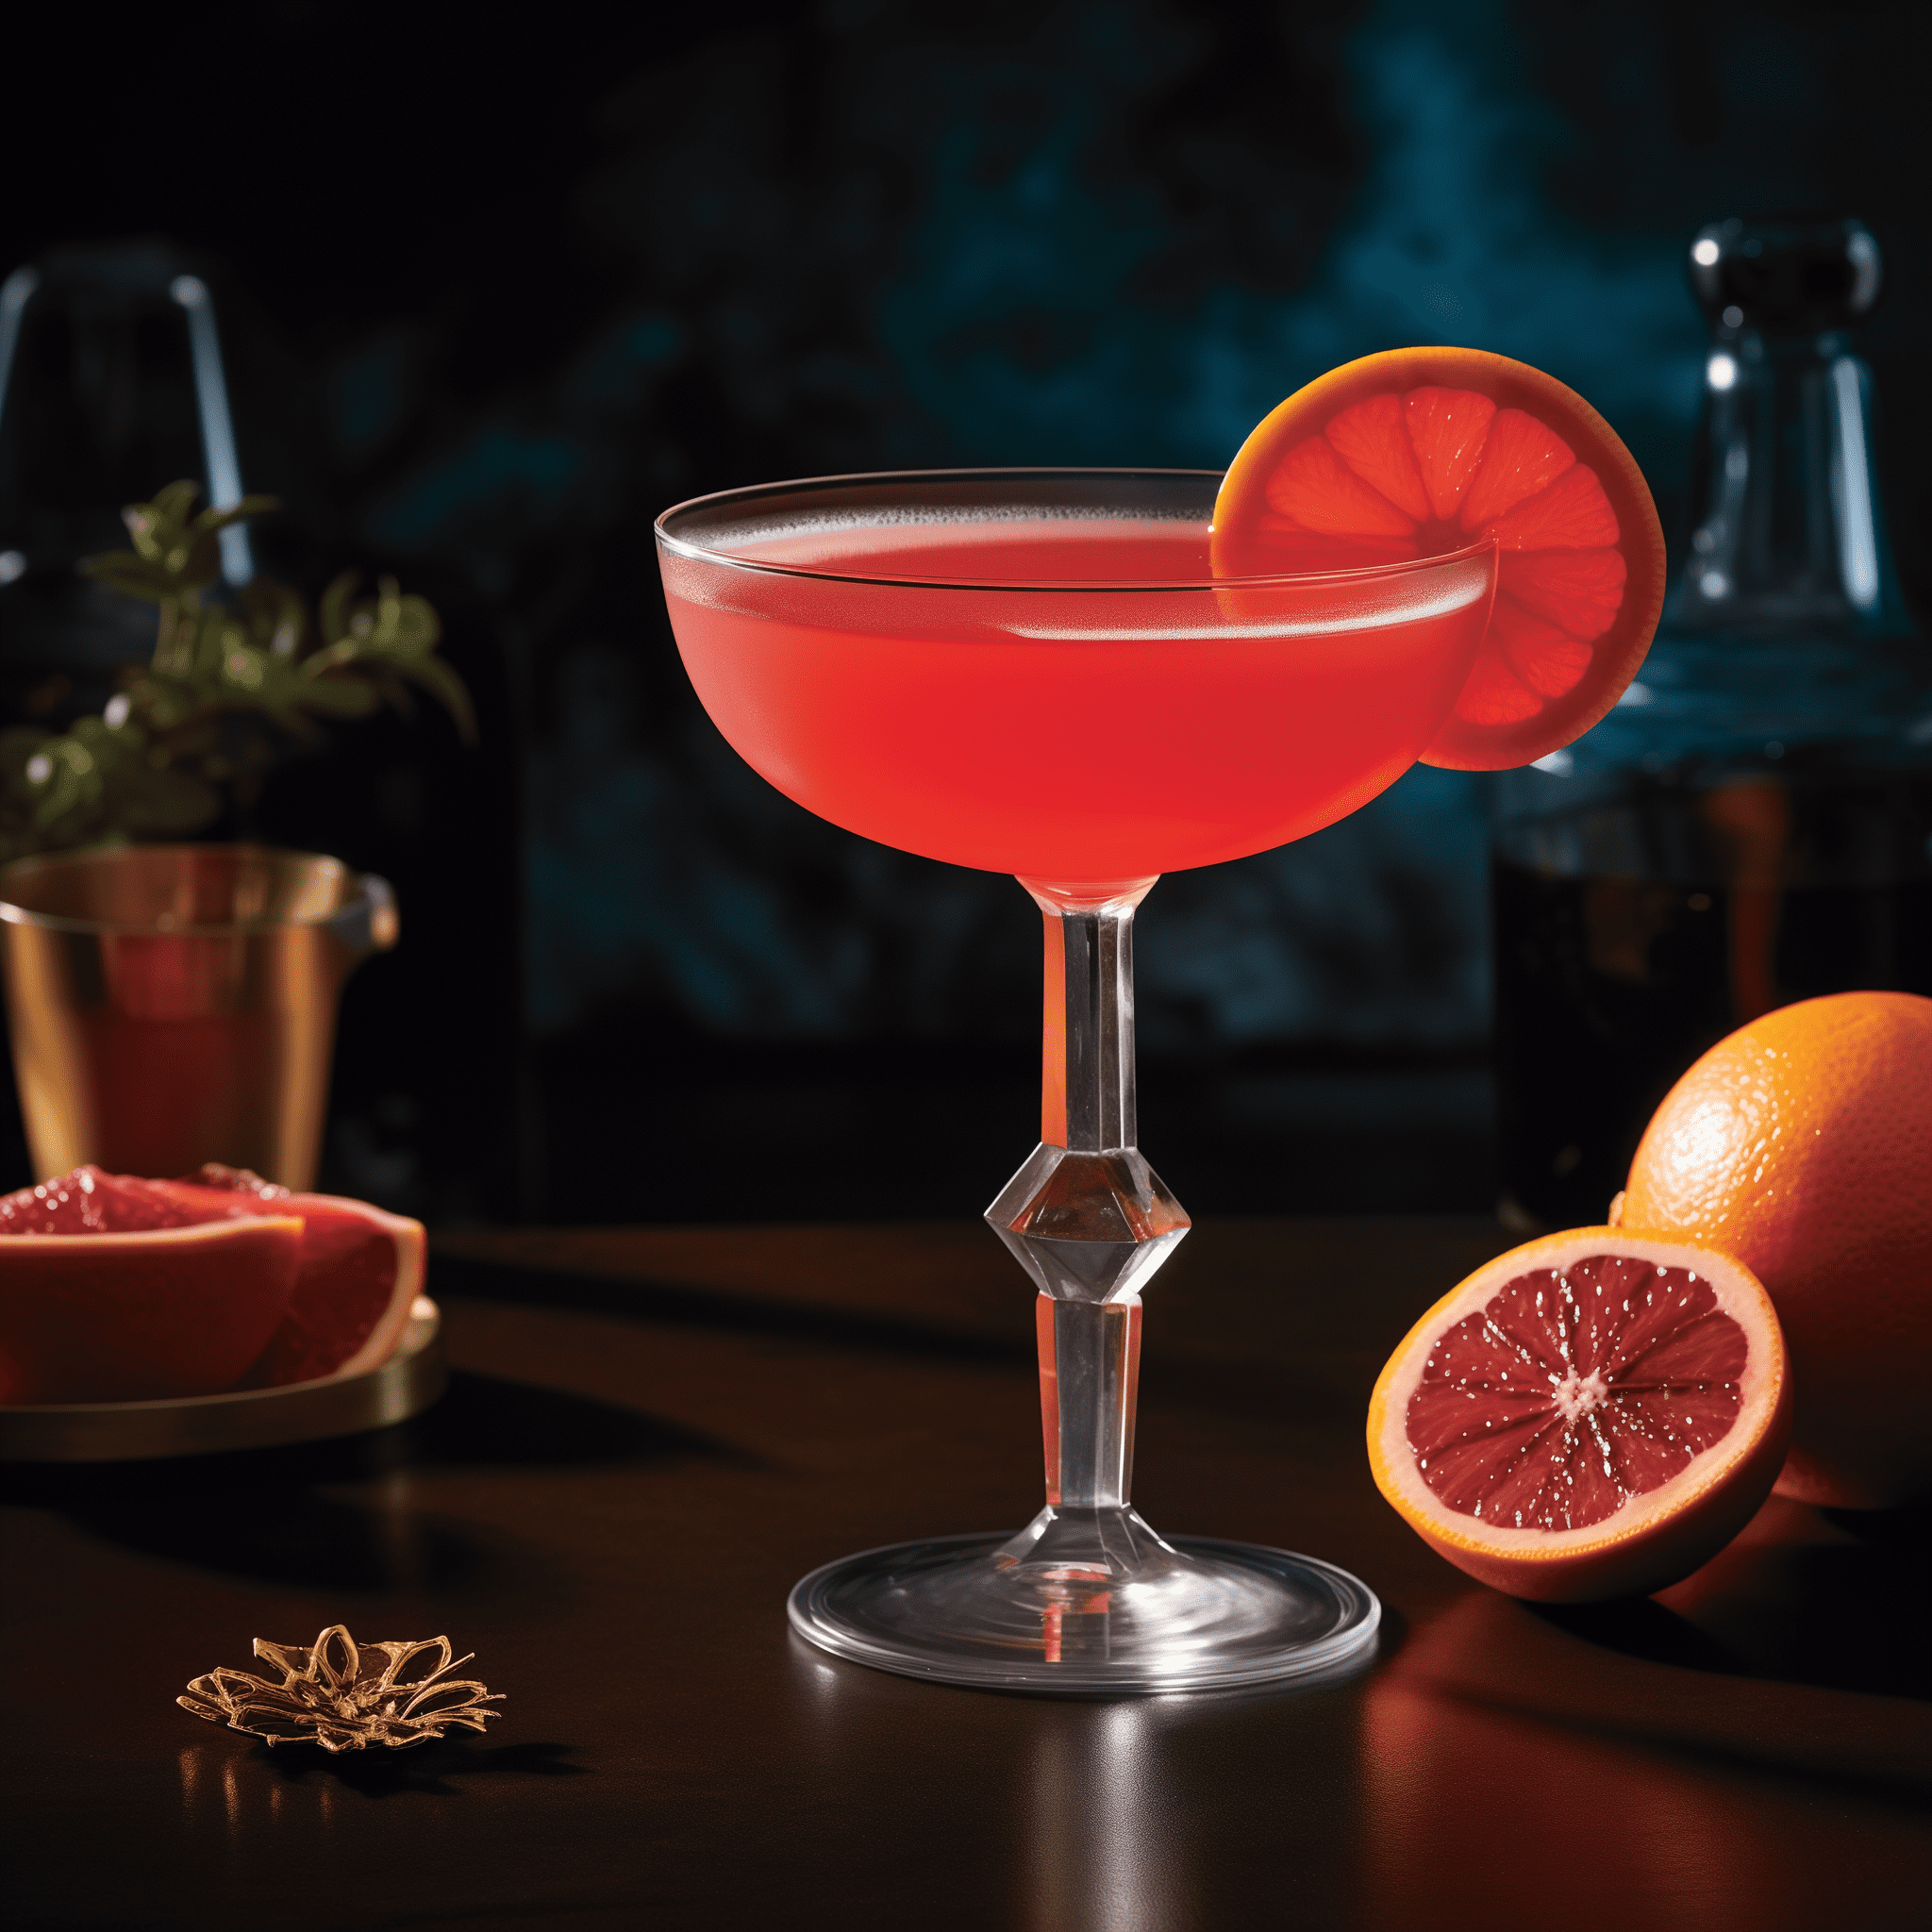 Red Alert Cocktail Recipe - The Red Alert cocktail is a tantalizing mix of sweet and tart flavors. The grapefruit juice provides a citrusy zing, while the grenadine adds a syrupy sweetness. The gin and rum offer a potent, boozy base that balances the drink with a warm, complex finish.